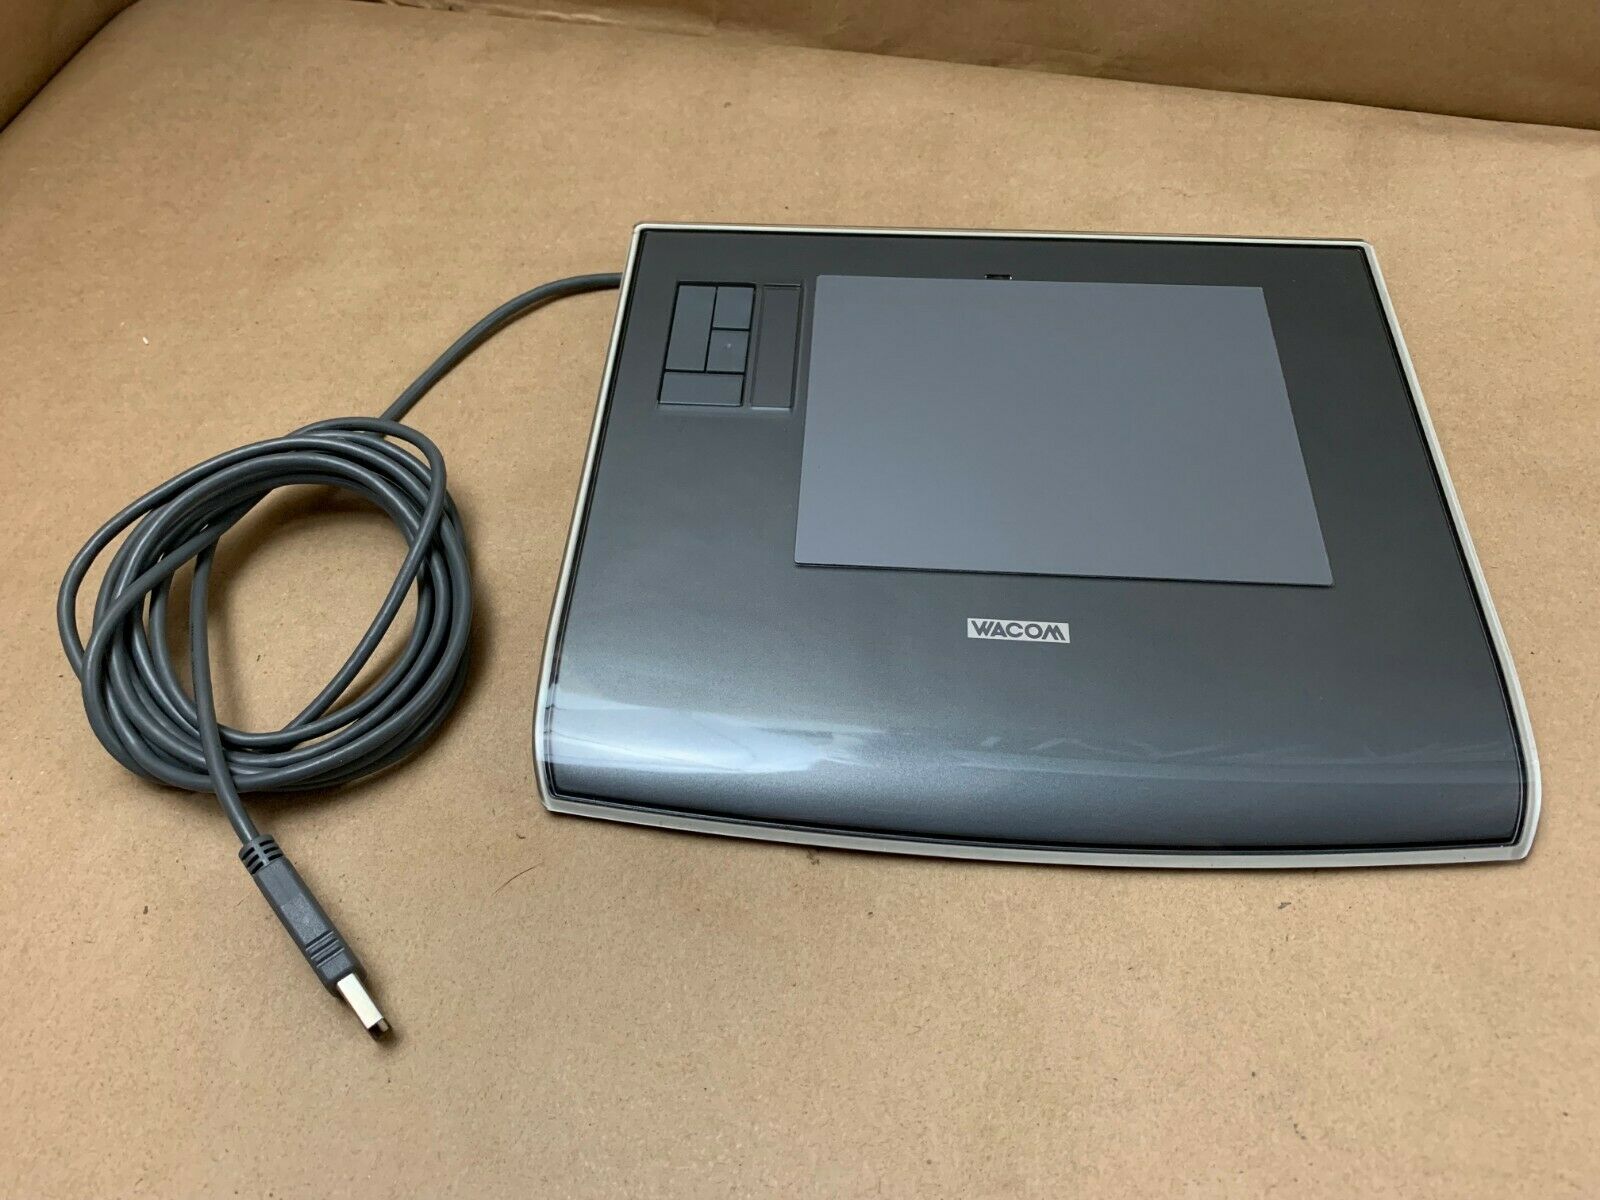 Wacom Intuos 3 PTZ-430 Graphic Drawing Tablet USB Connection